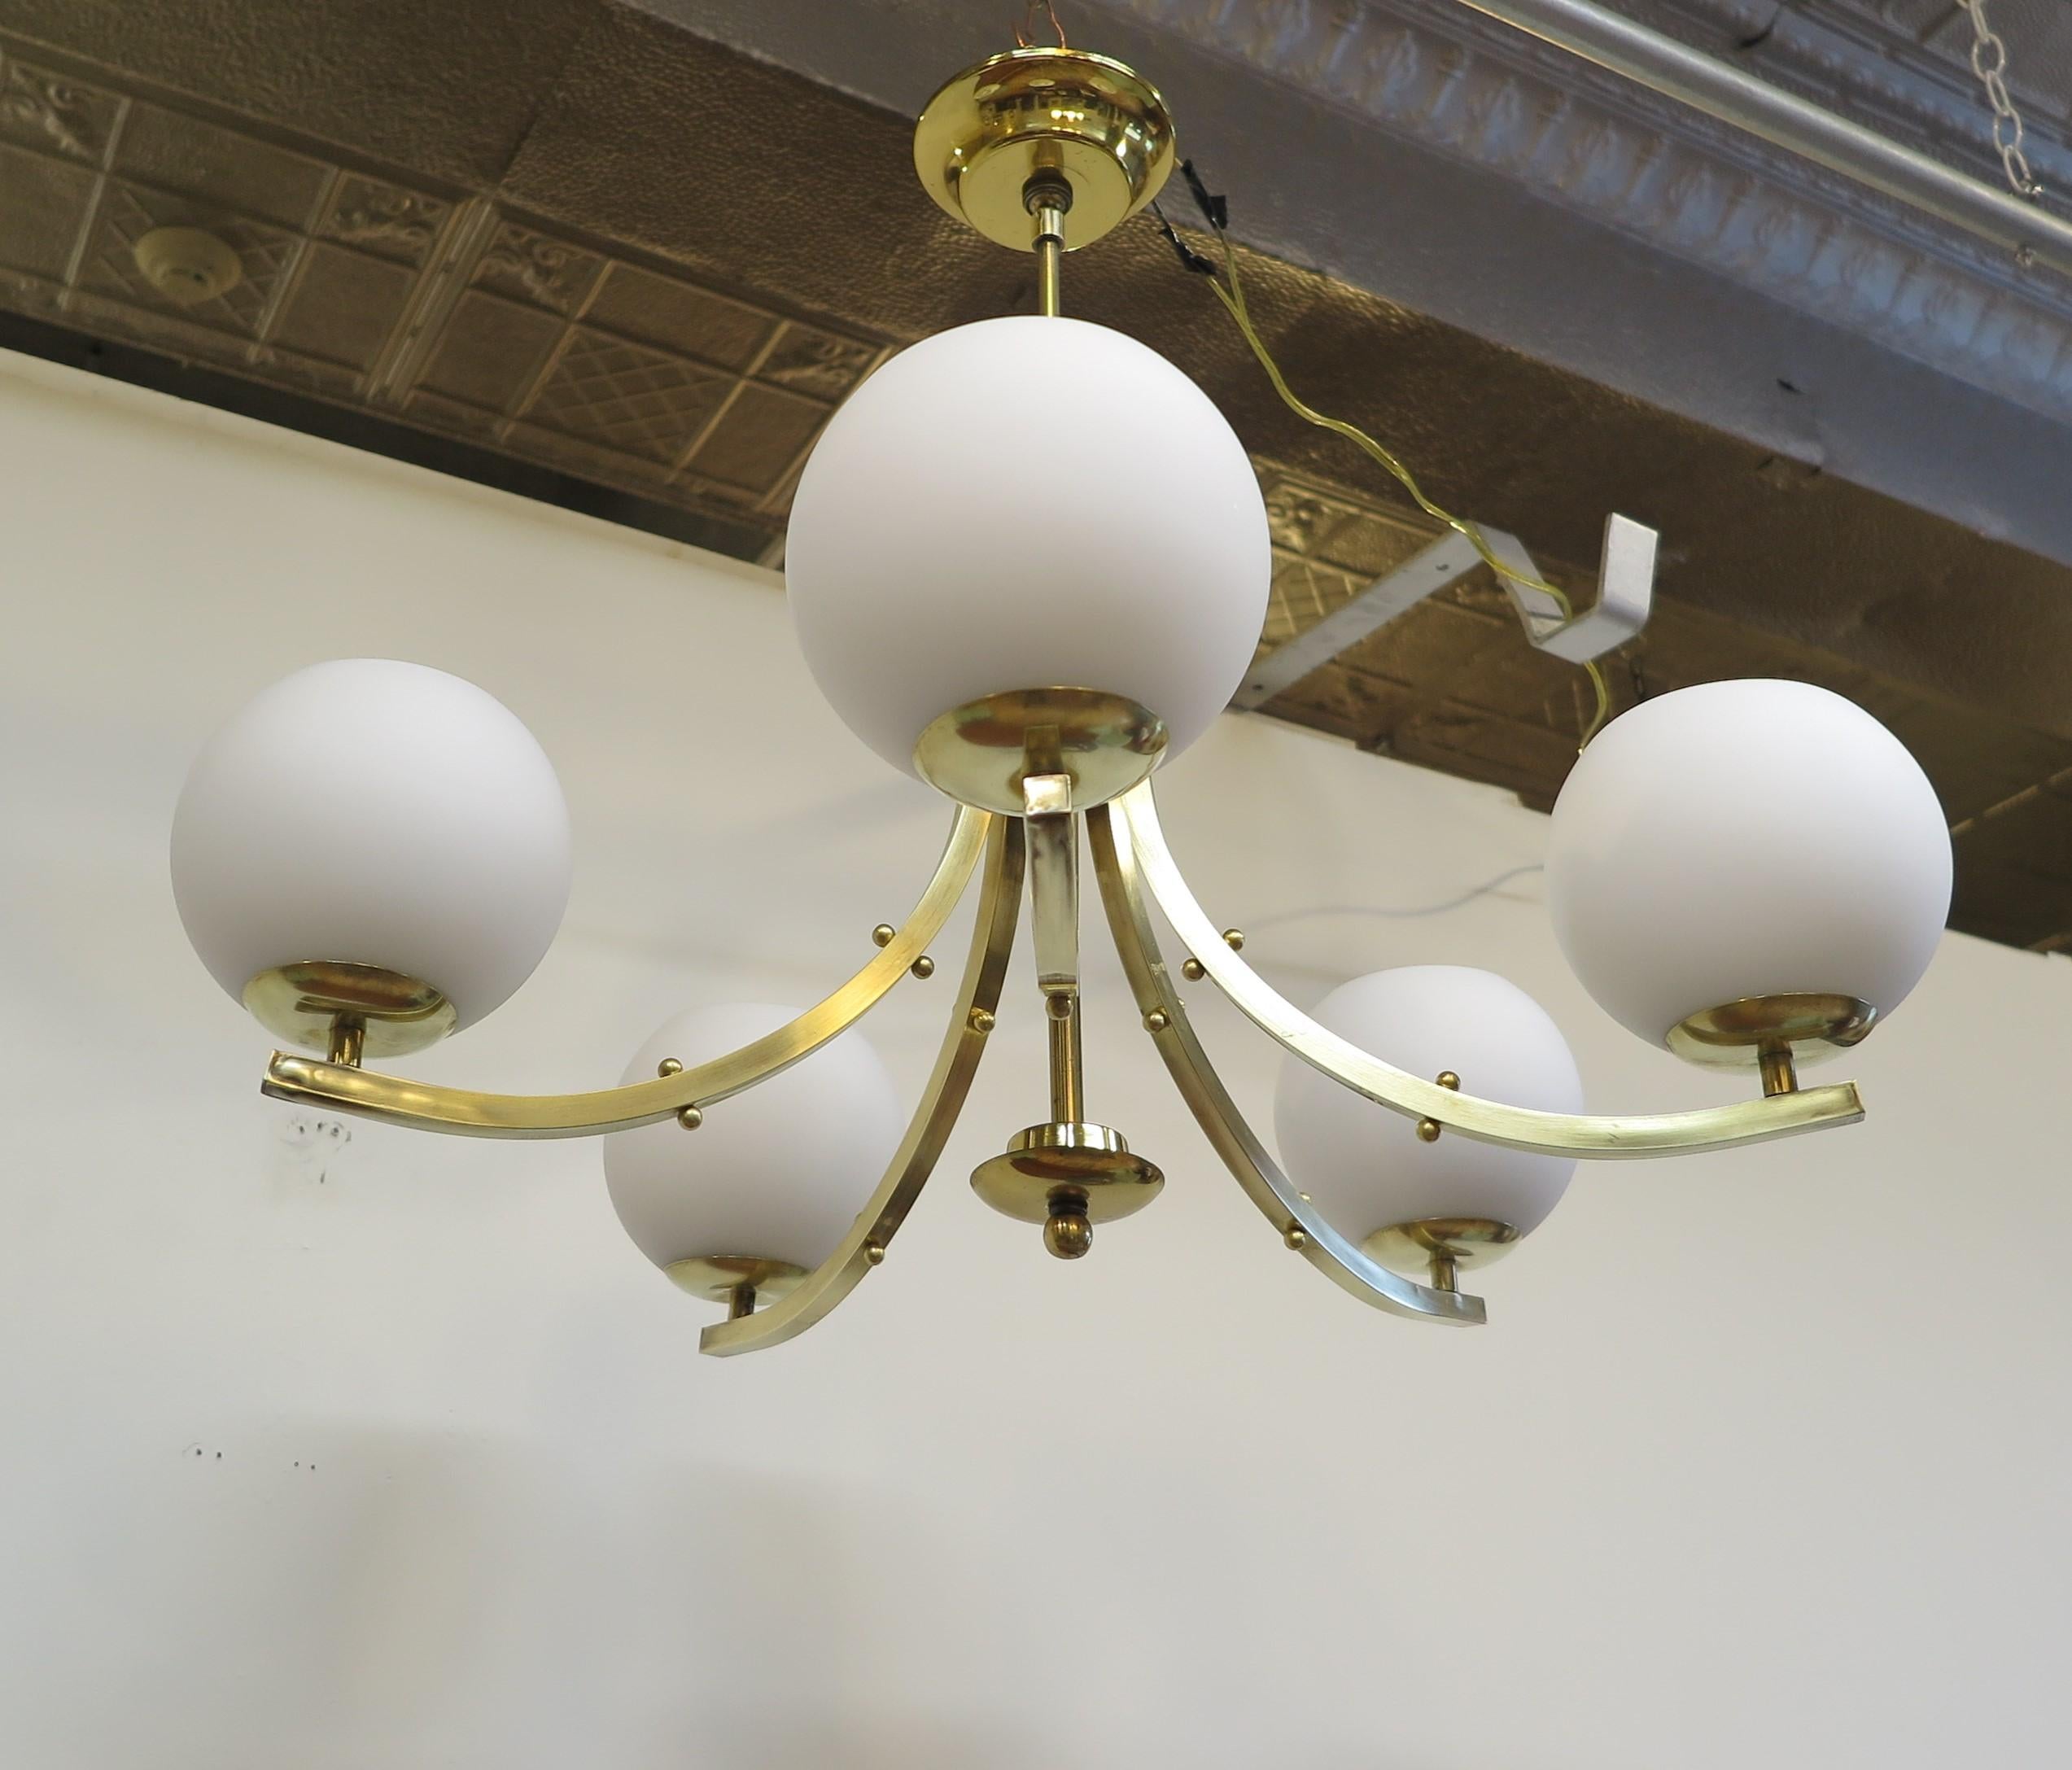 Stunning Mid-Century Modern Brass Chandelier. Lightolier Five Arm Brass Chandelier with frosted white glass sphere shaped shades. Five Arm Brass Mid-Century Modern Sphere Glass Chandelier. Five upswept square brass tube arms with small brass ball